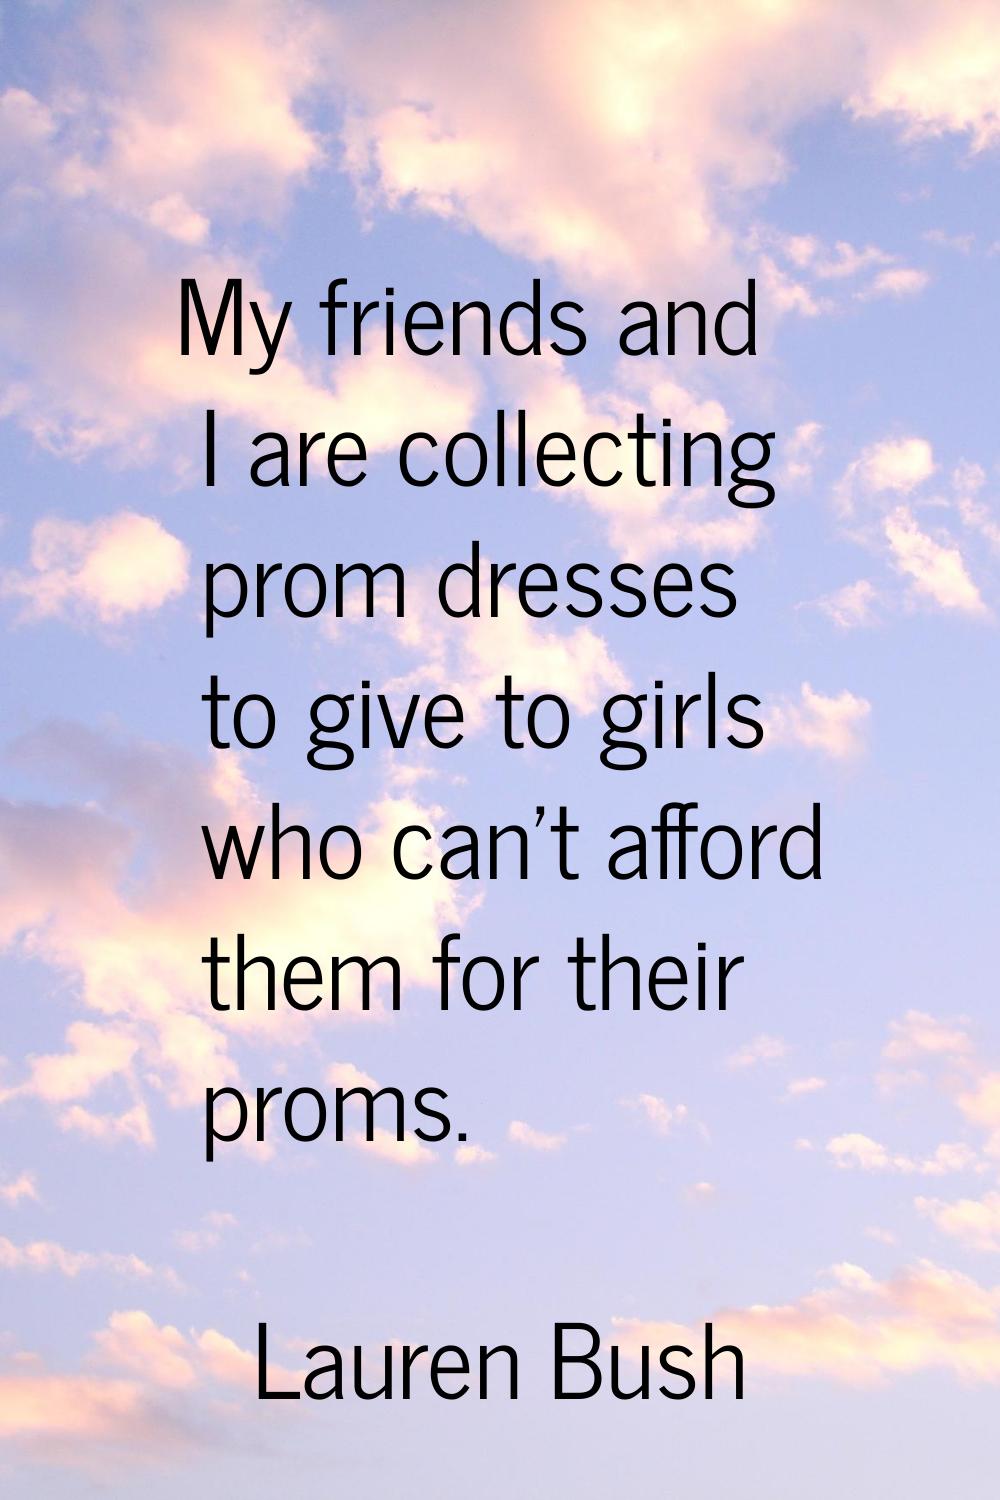 My friends and I are collecting prom dresses to give to girls who can't afford them for their proms